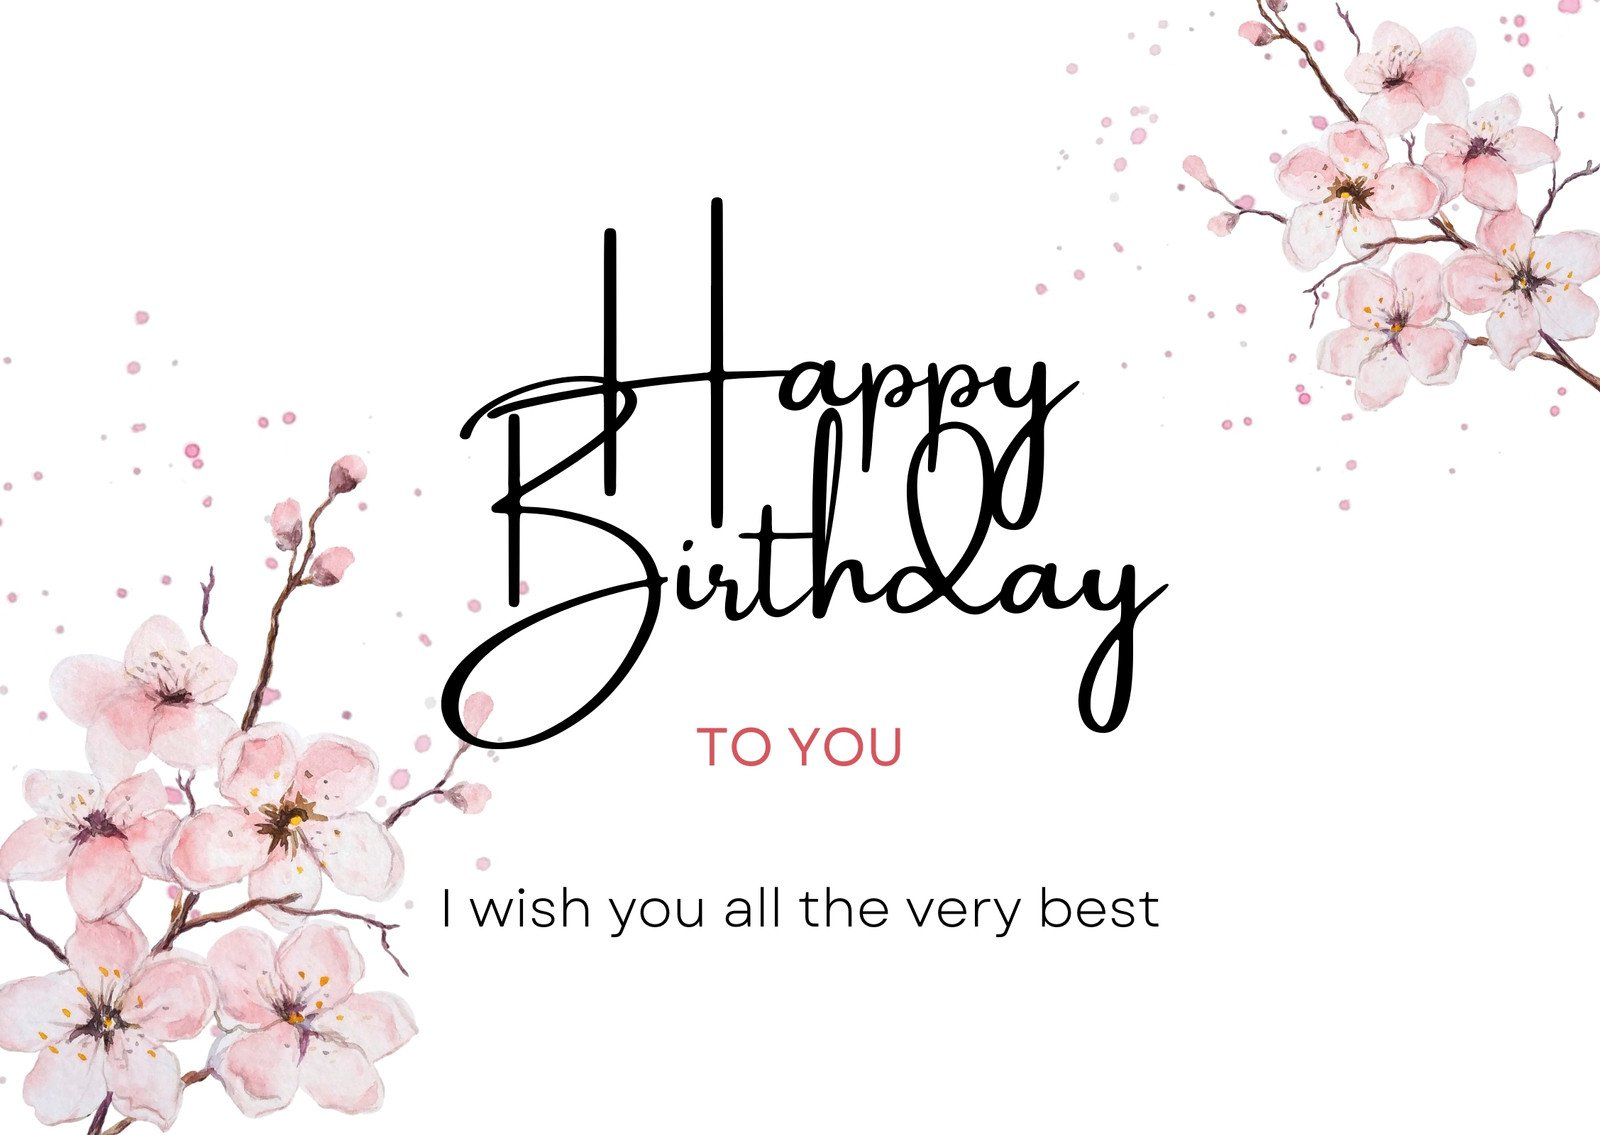 Free, Custom Printable Birthday Card Templates | Canva intended for Customized Birthday Cards Free Printable